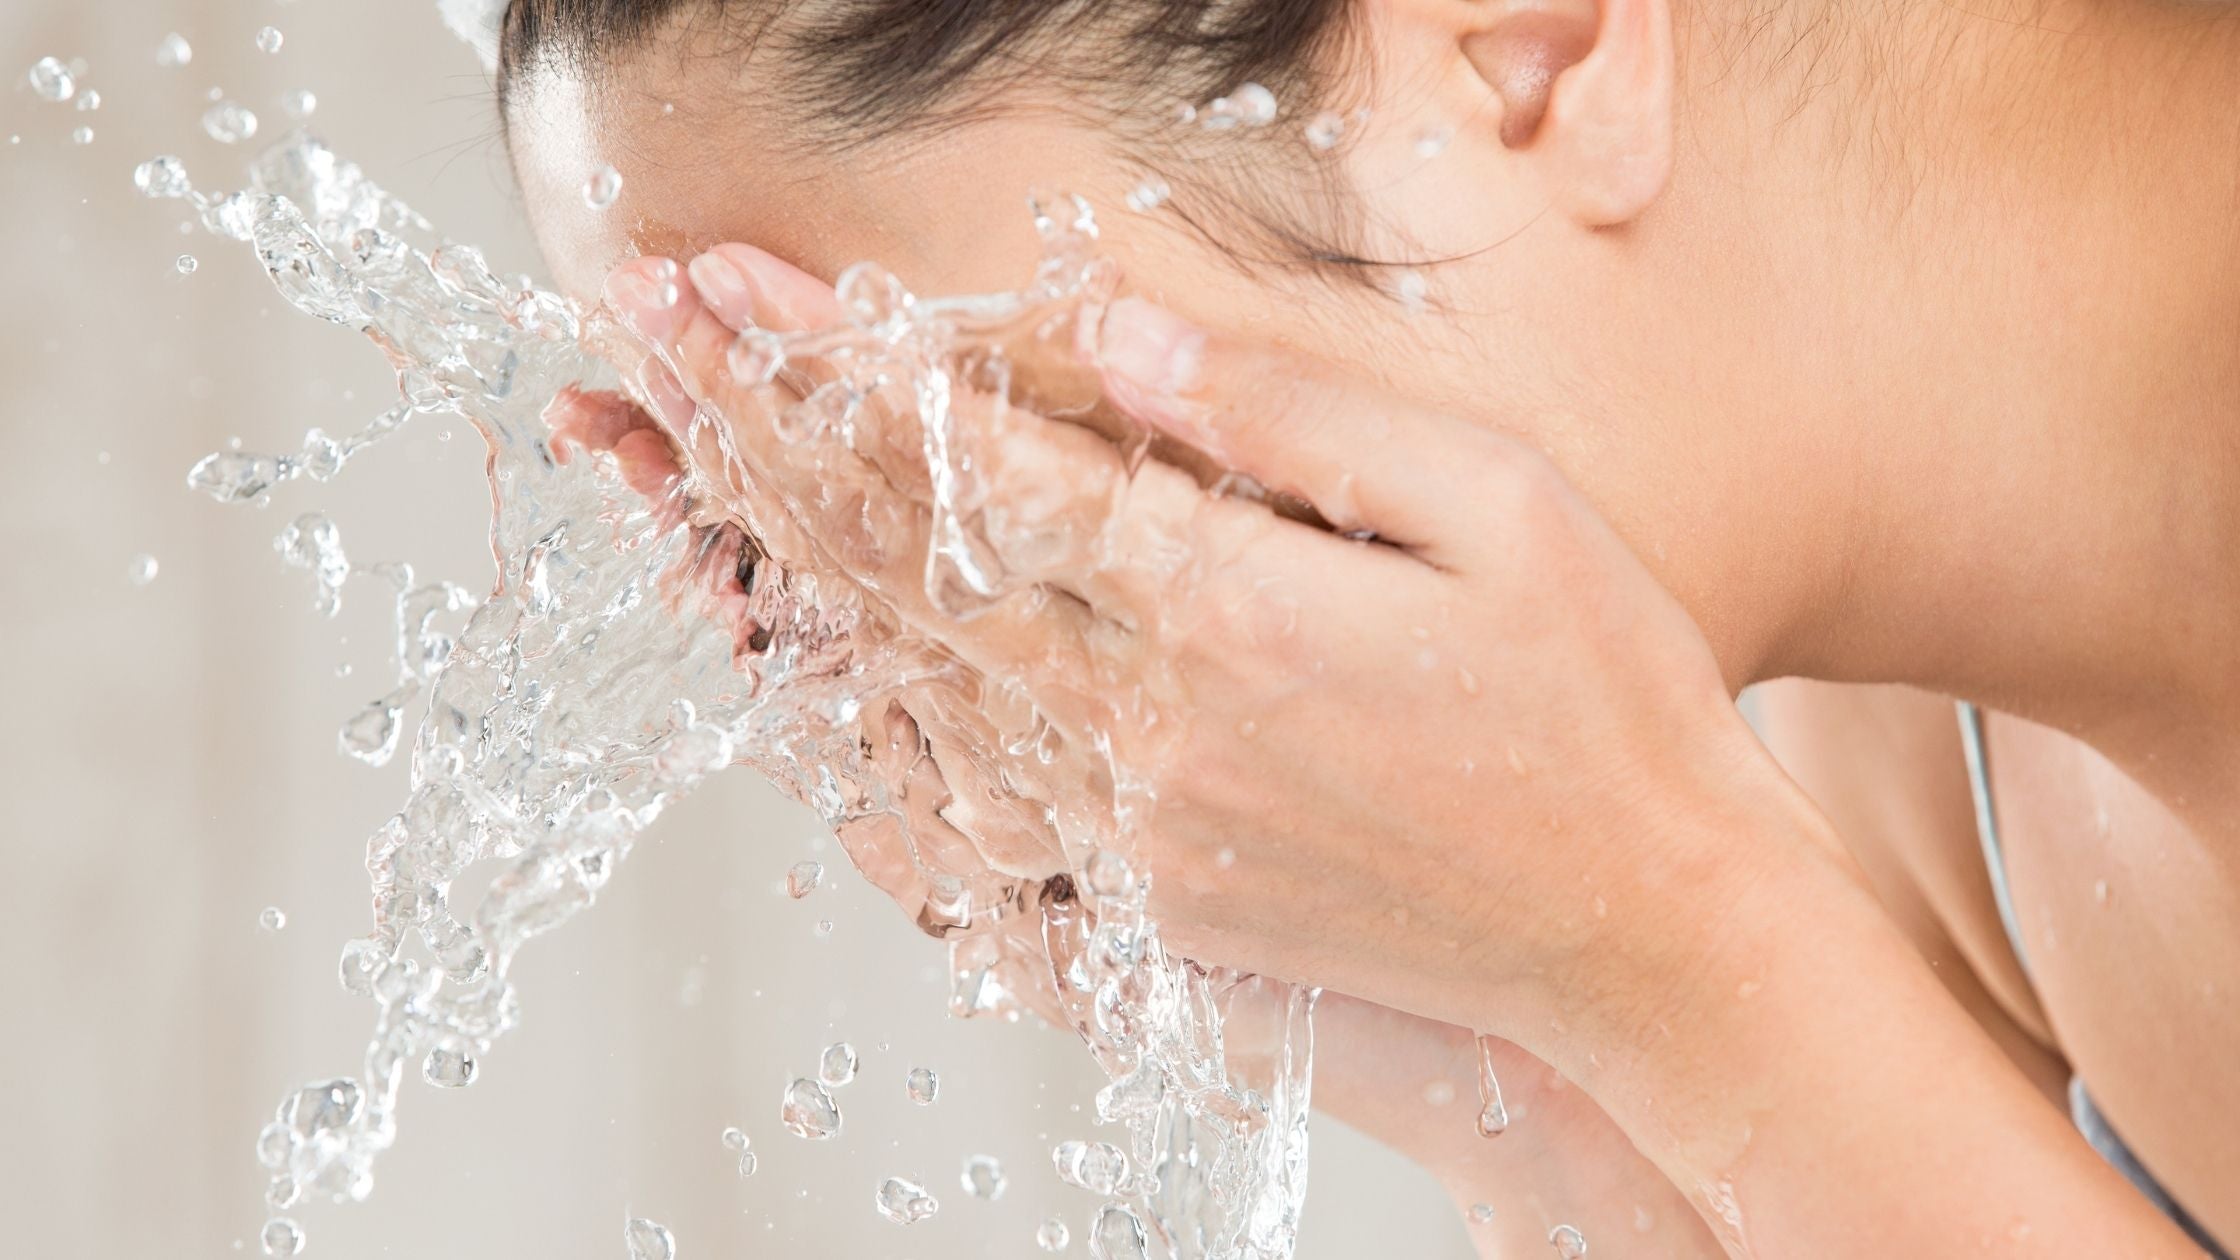 The Do's and Don'ts For Washing Your Face – Minimalist